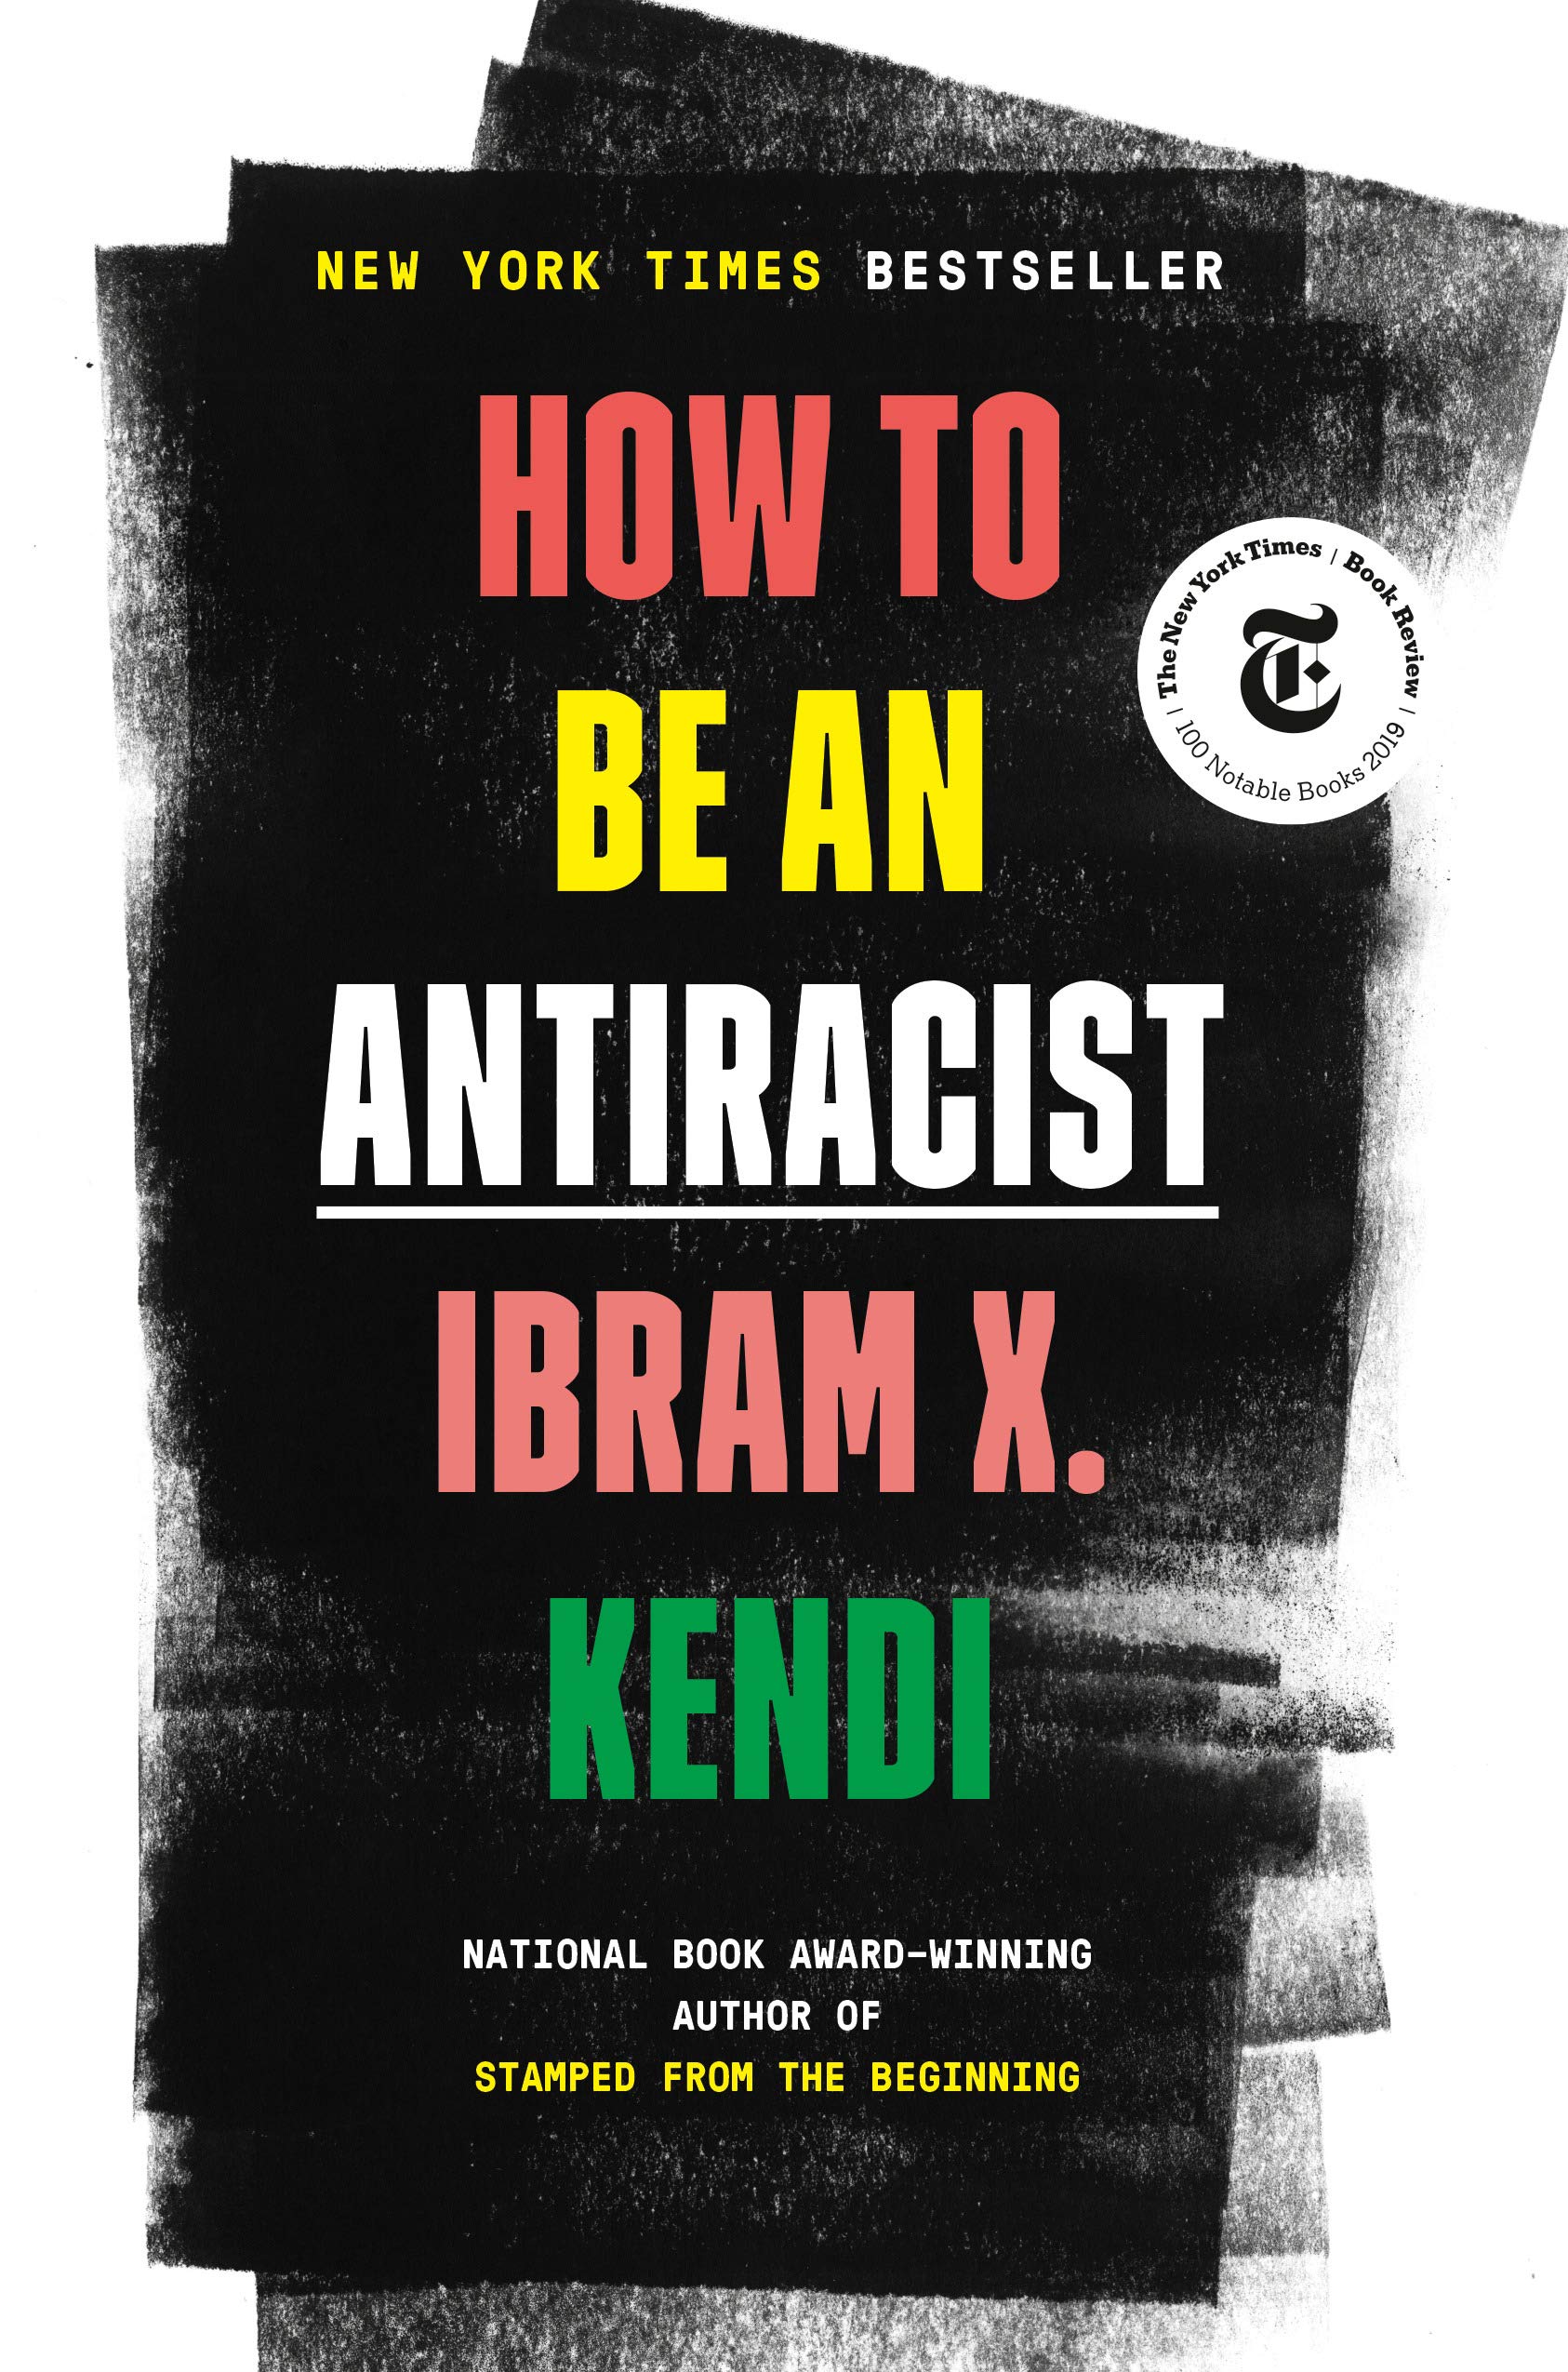 'How To Be An Antiracist' by Ibram X. Kendi